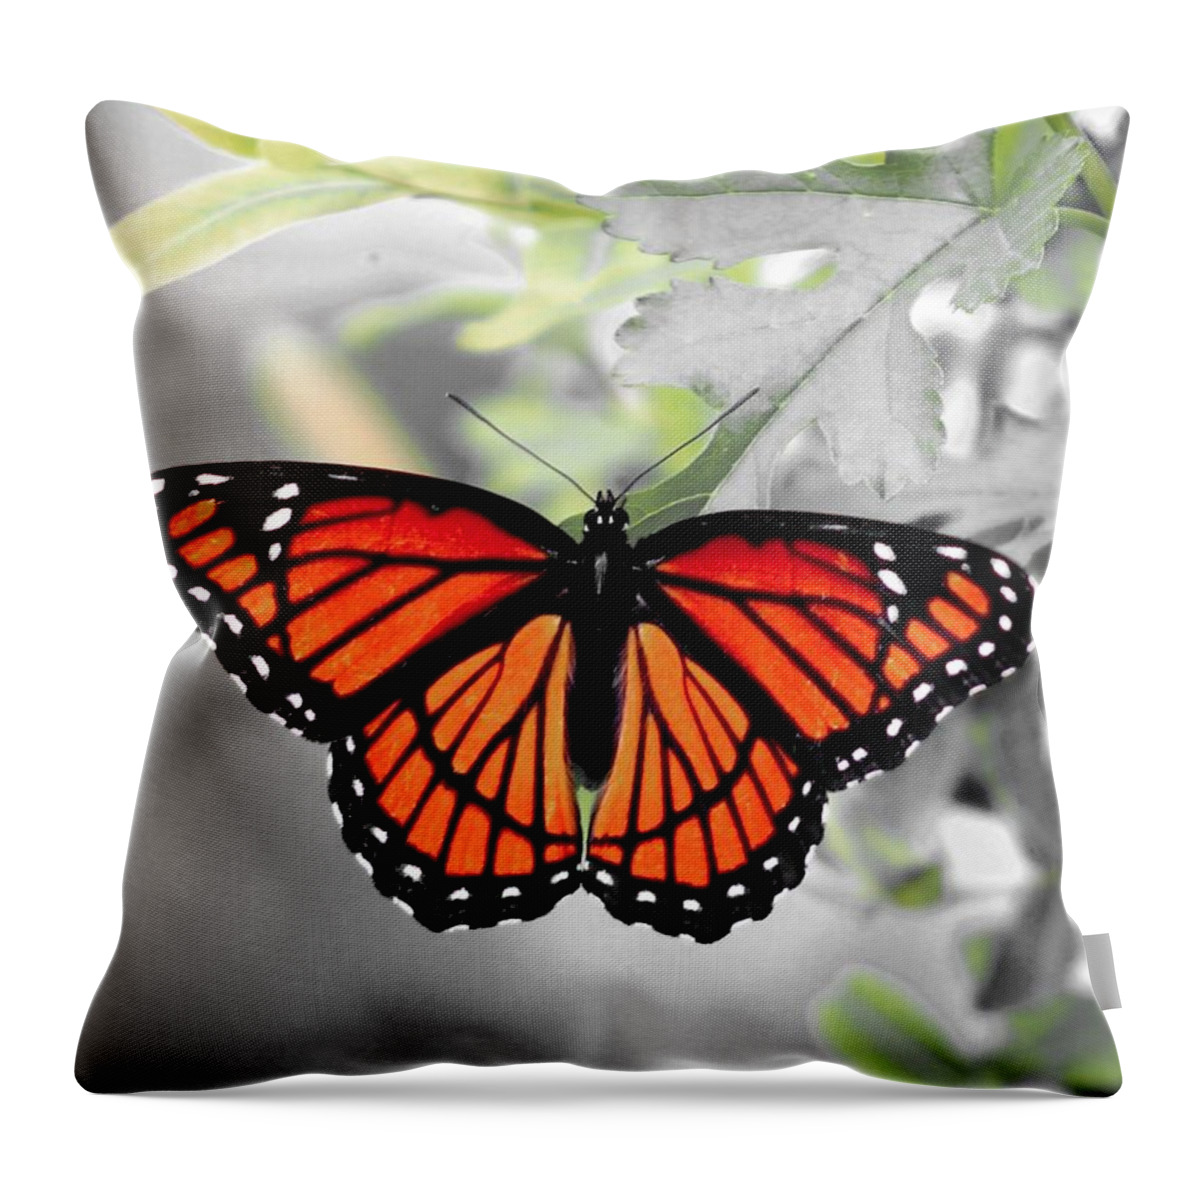 Viceroy Throw Pillow featuring the photograph Viceroy Butterfly by Christopher Reed